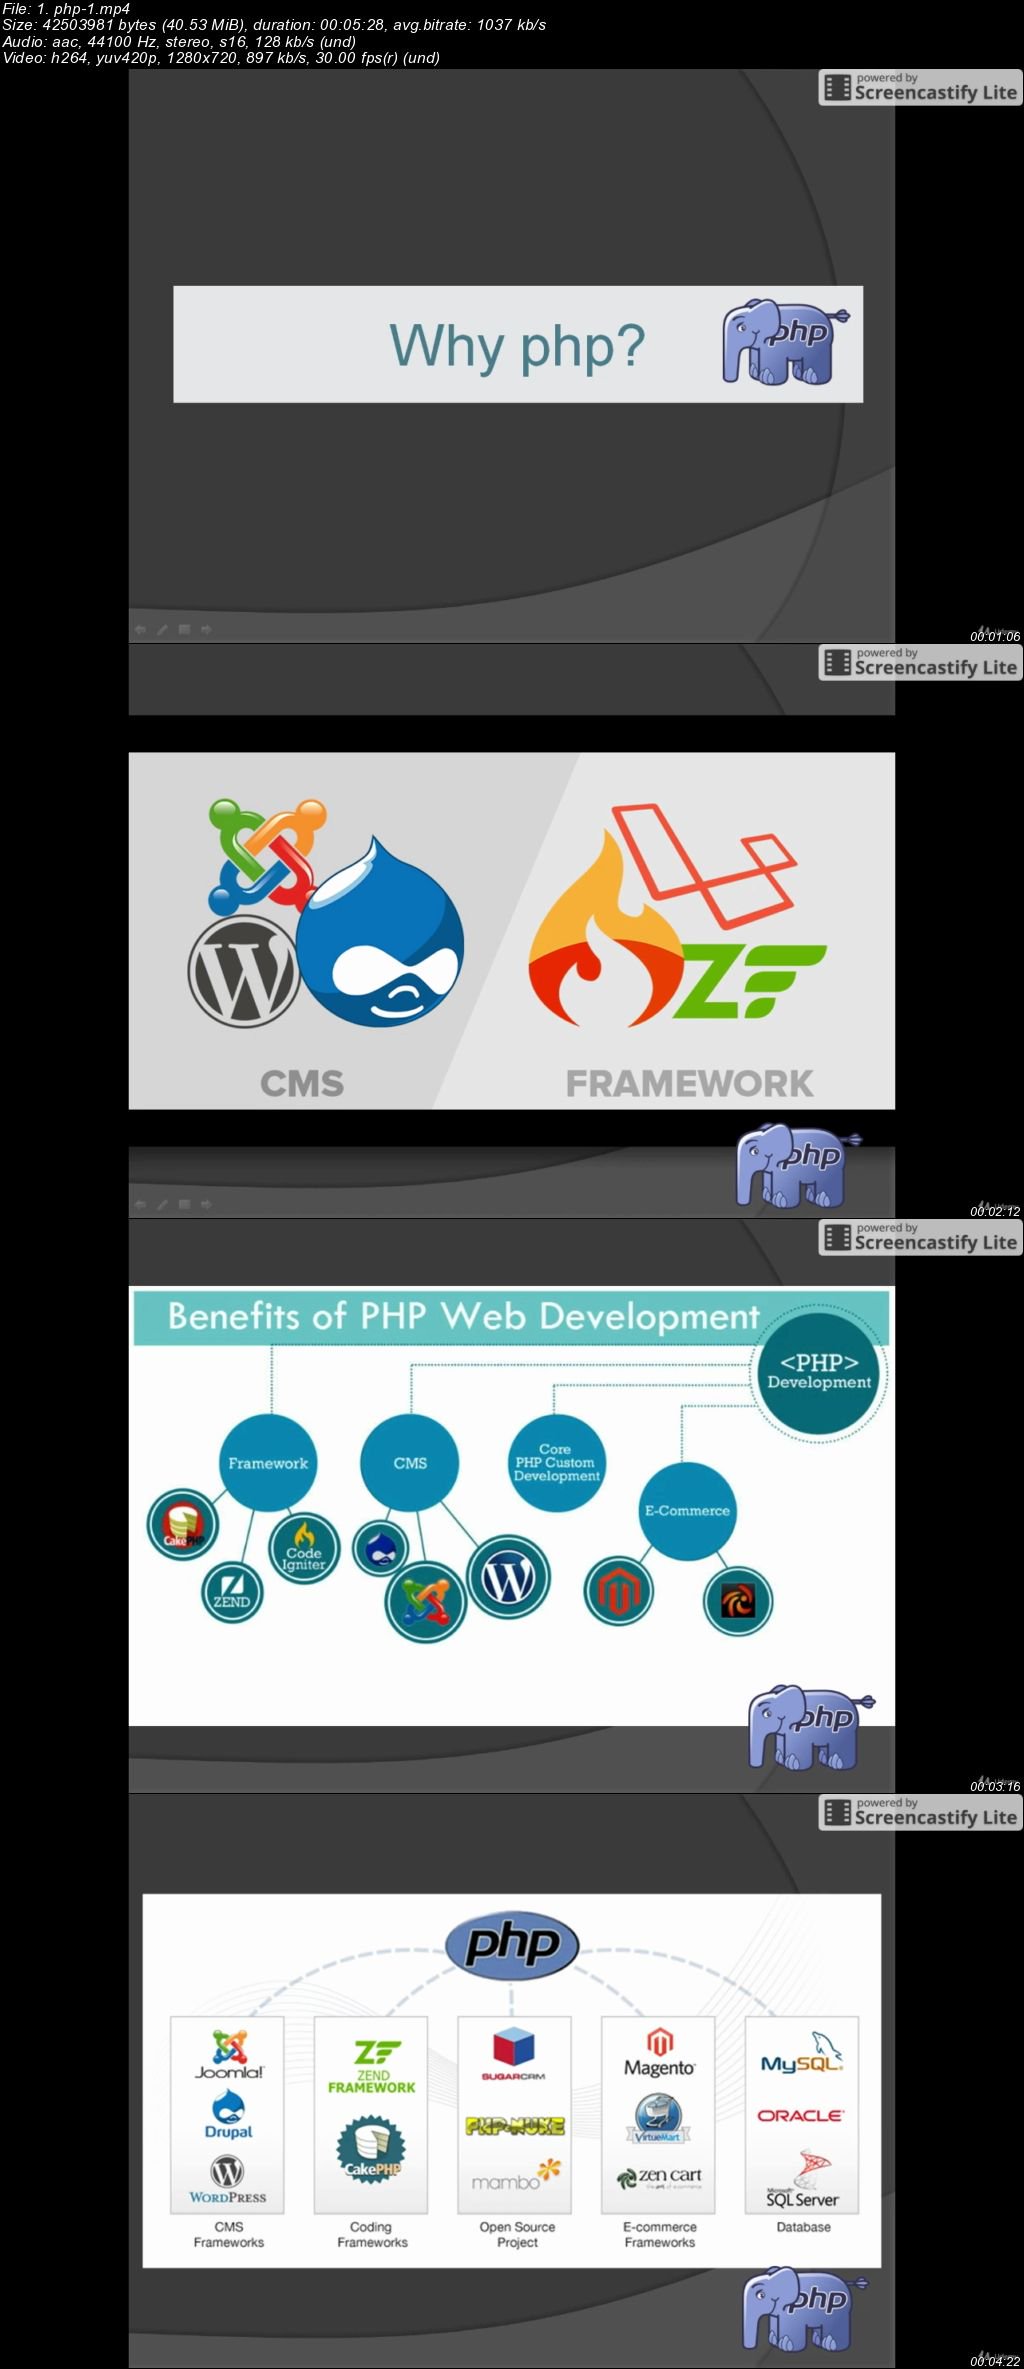 Backend Development with PHP and PERL